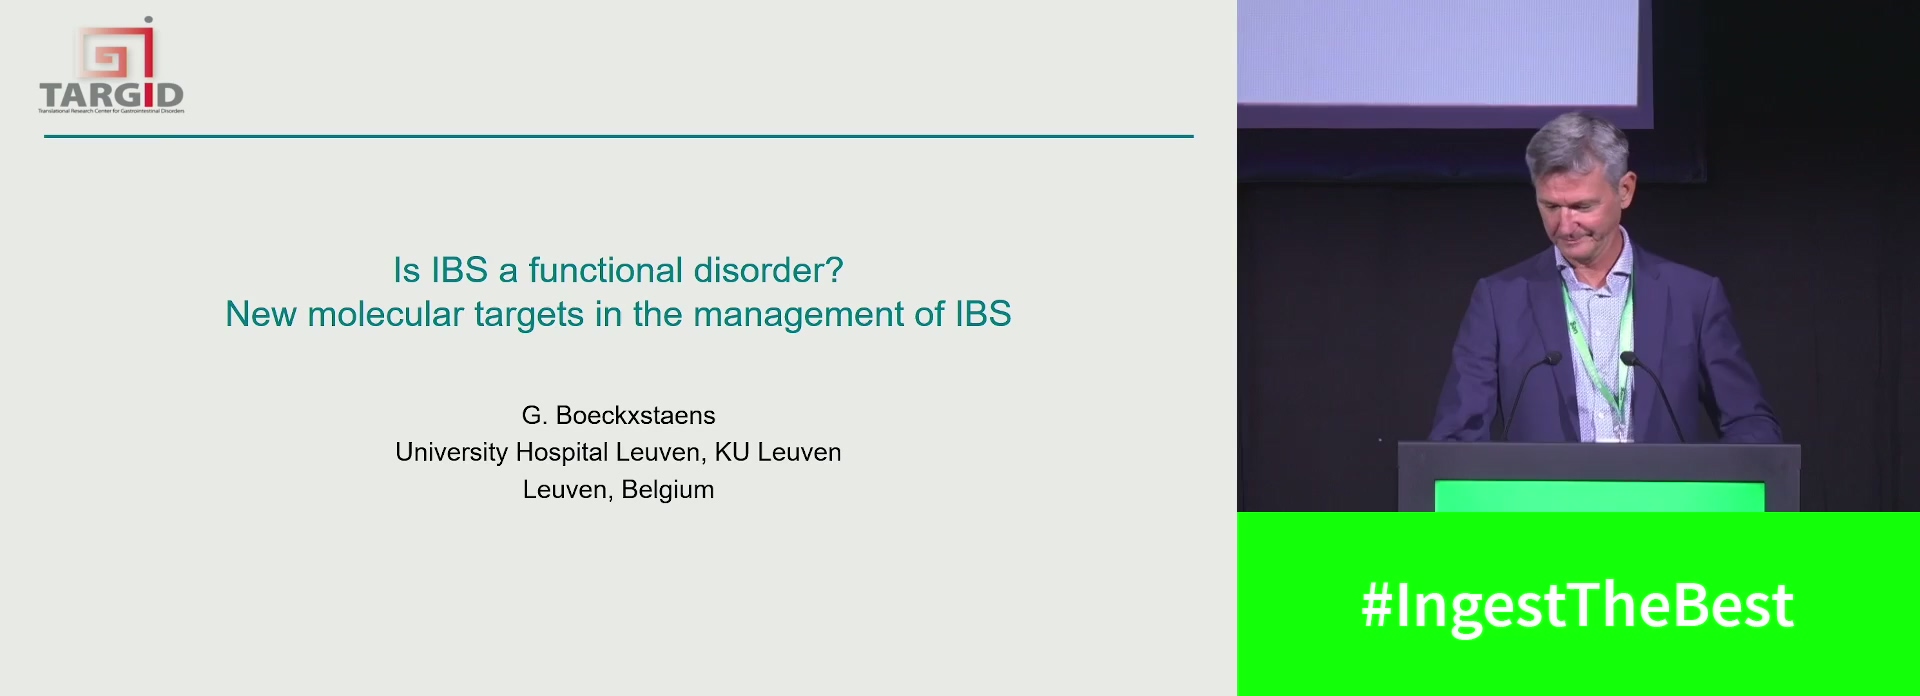 Is IBS a functional disorder? New molecular targets in the management of IBS